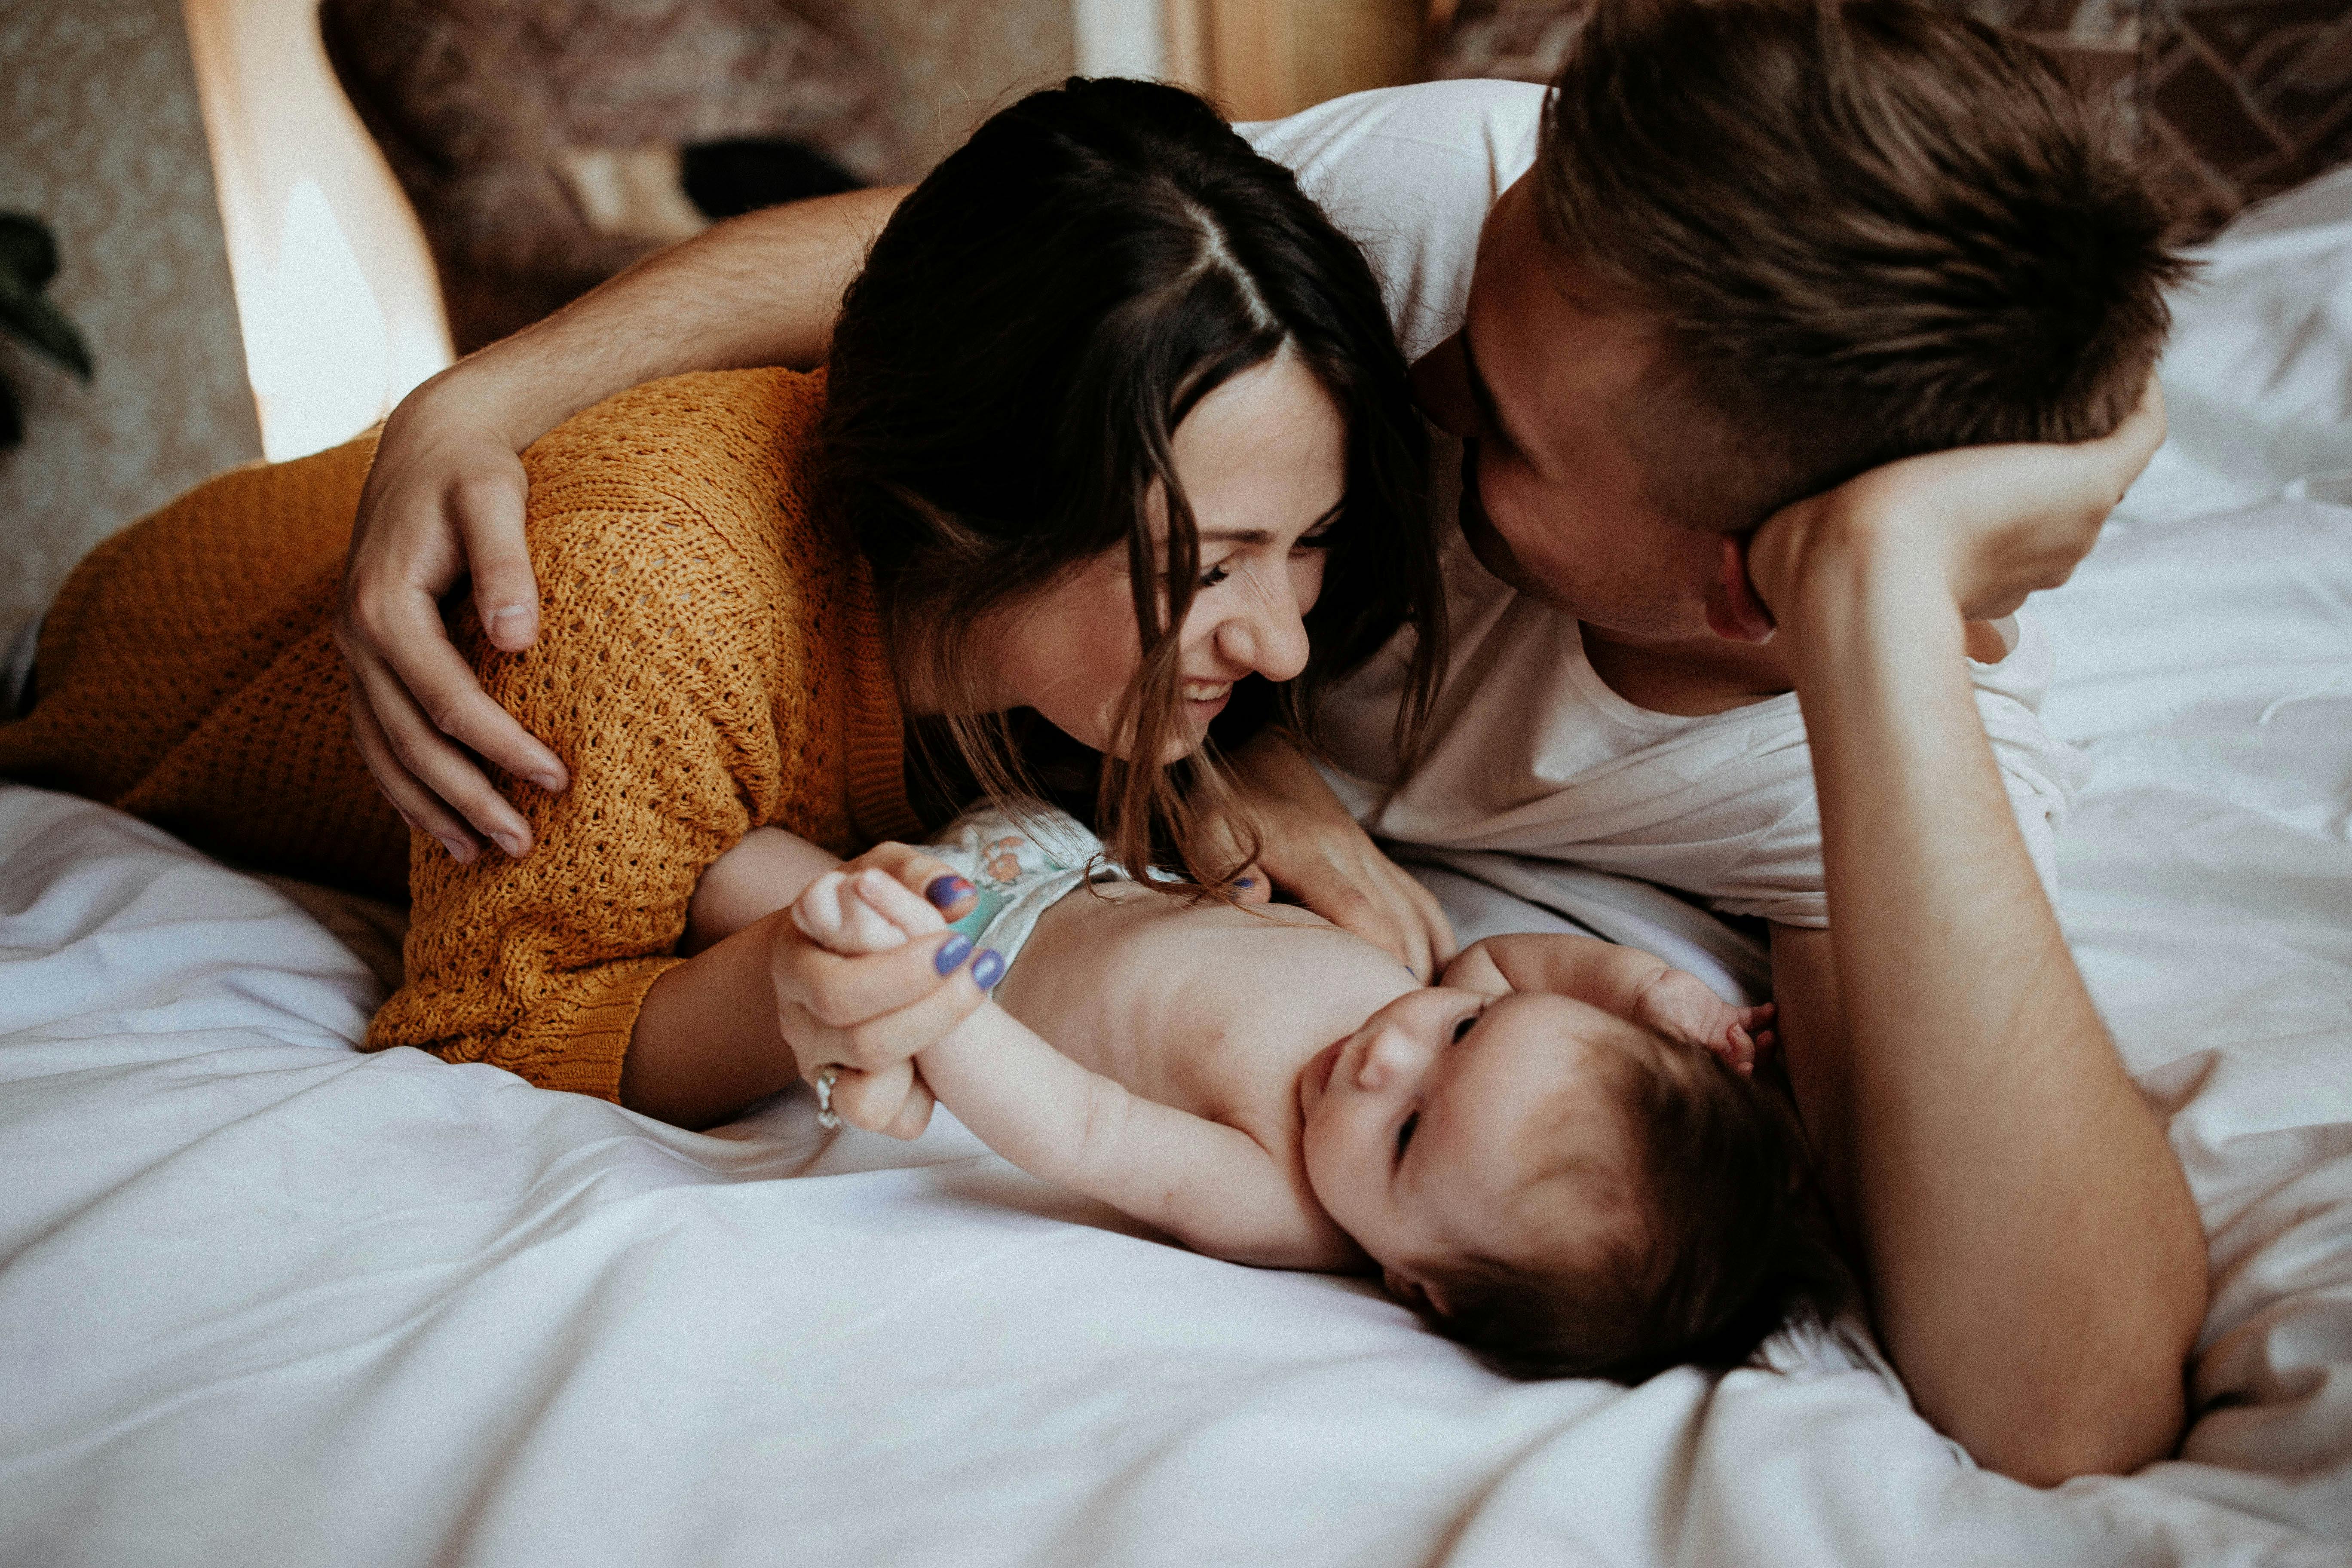 A happy couple bonding with their baby | Source: Pexels